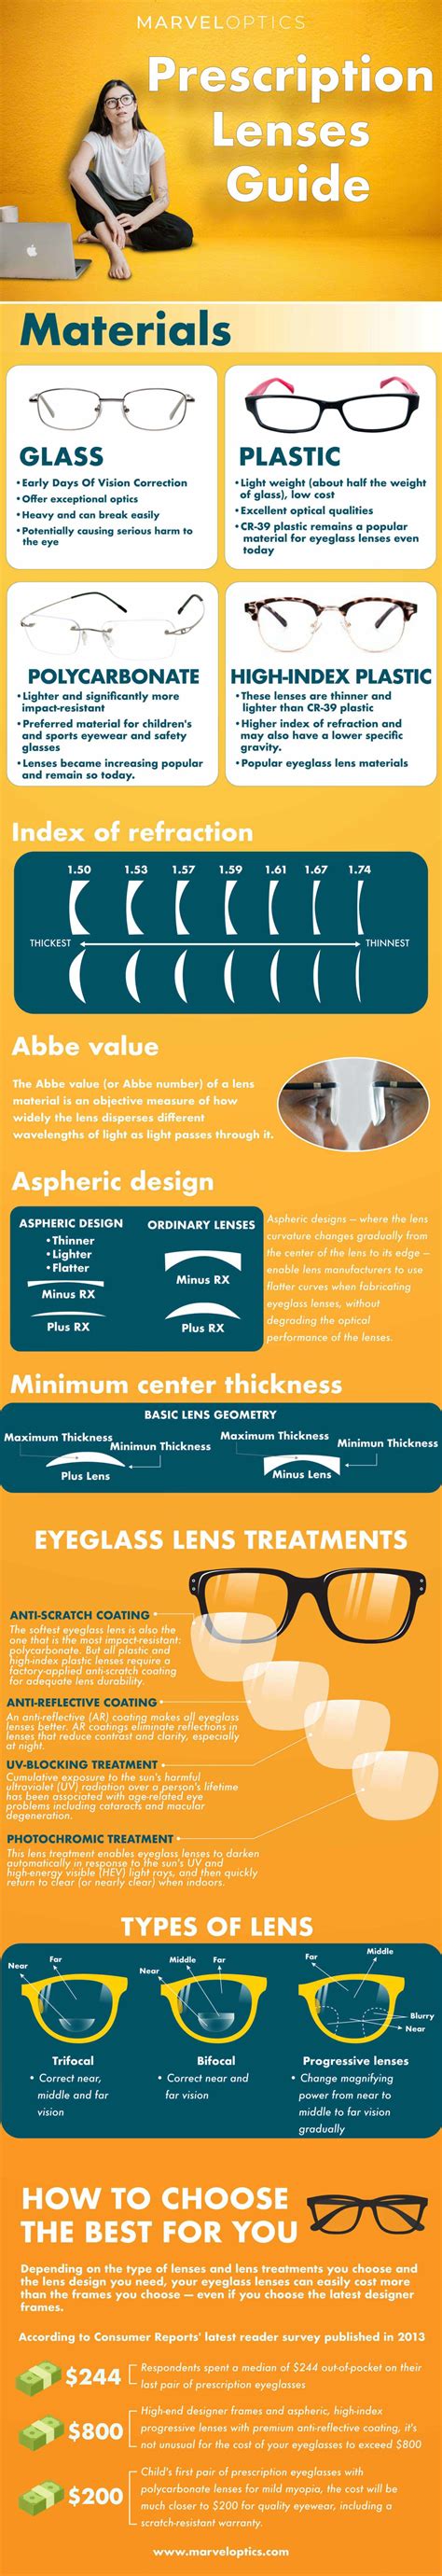 A Guide To Selecting The Best Prescription Lenses For Your Needs [infographic]